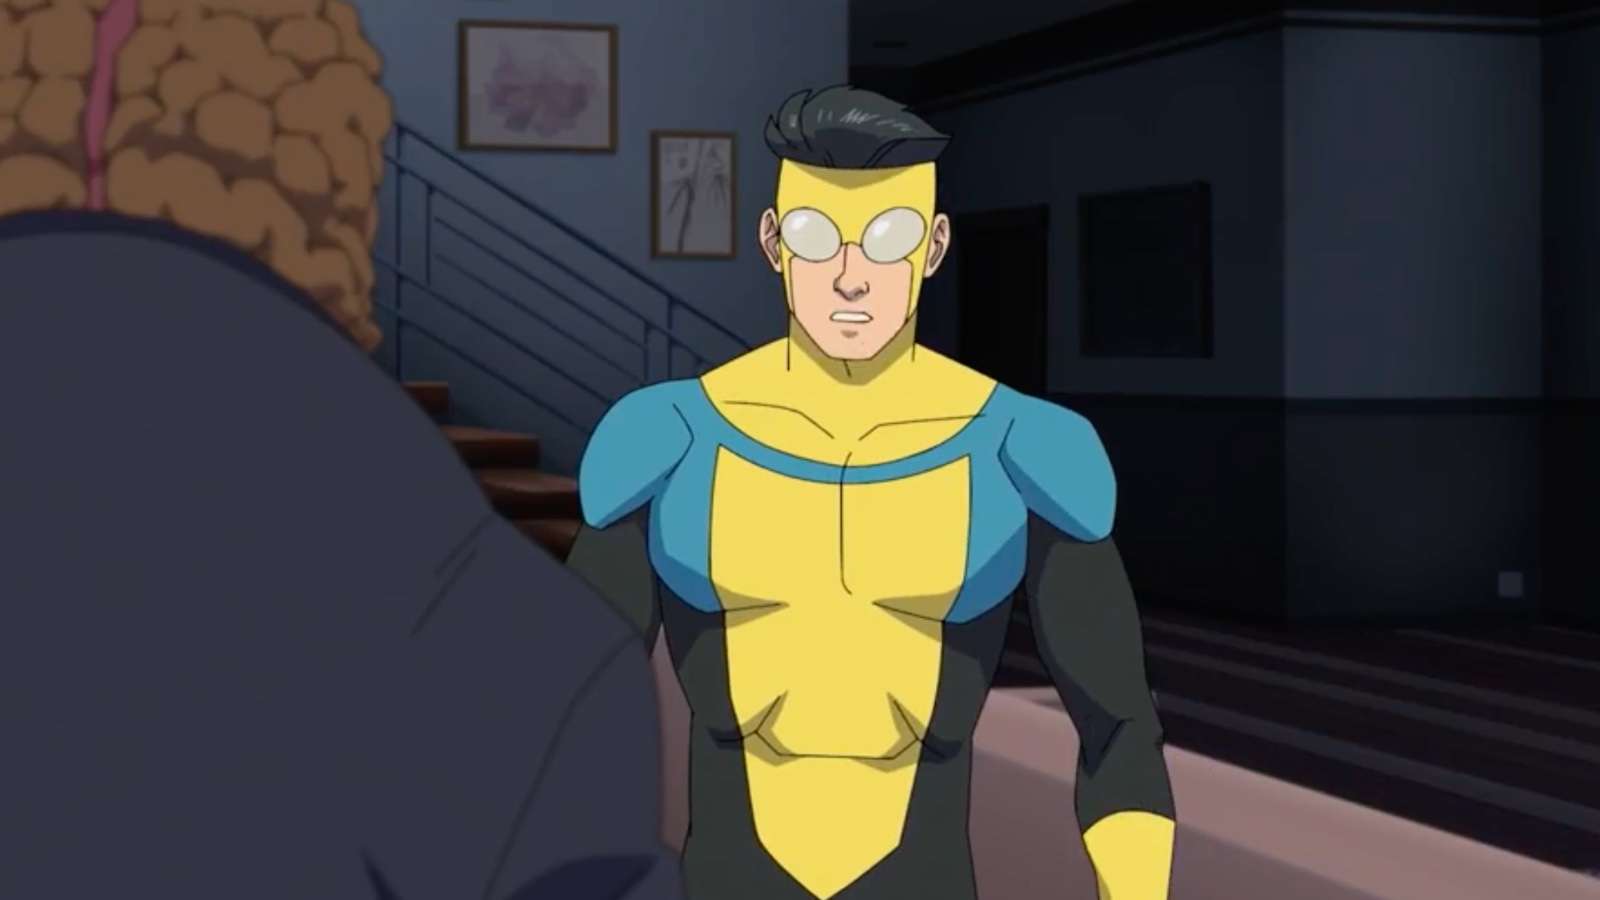 Mark and Levy in Invincible Season 2 Episode 8.